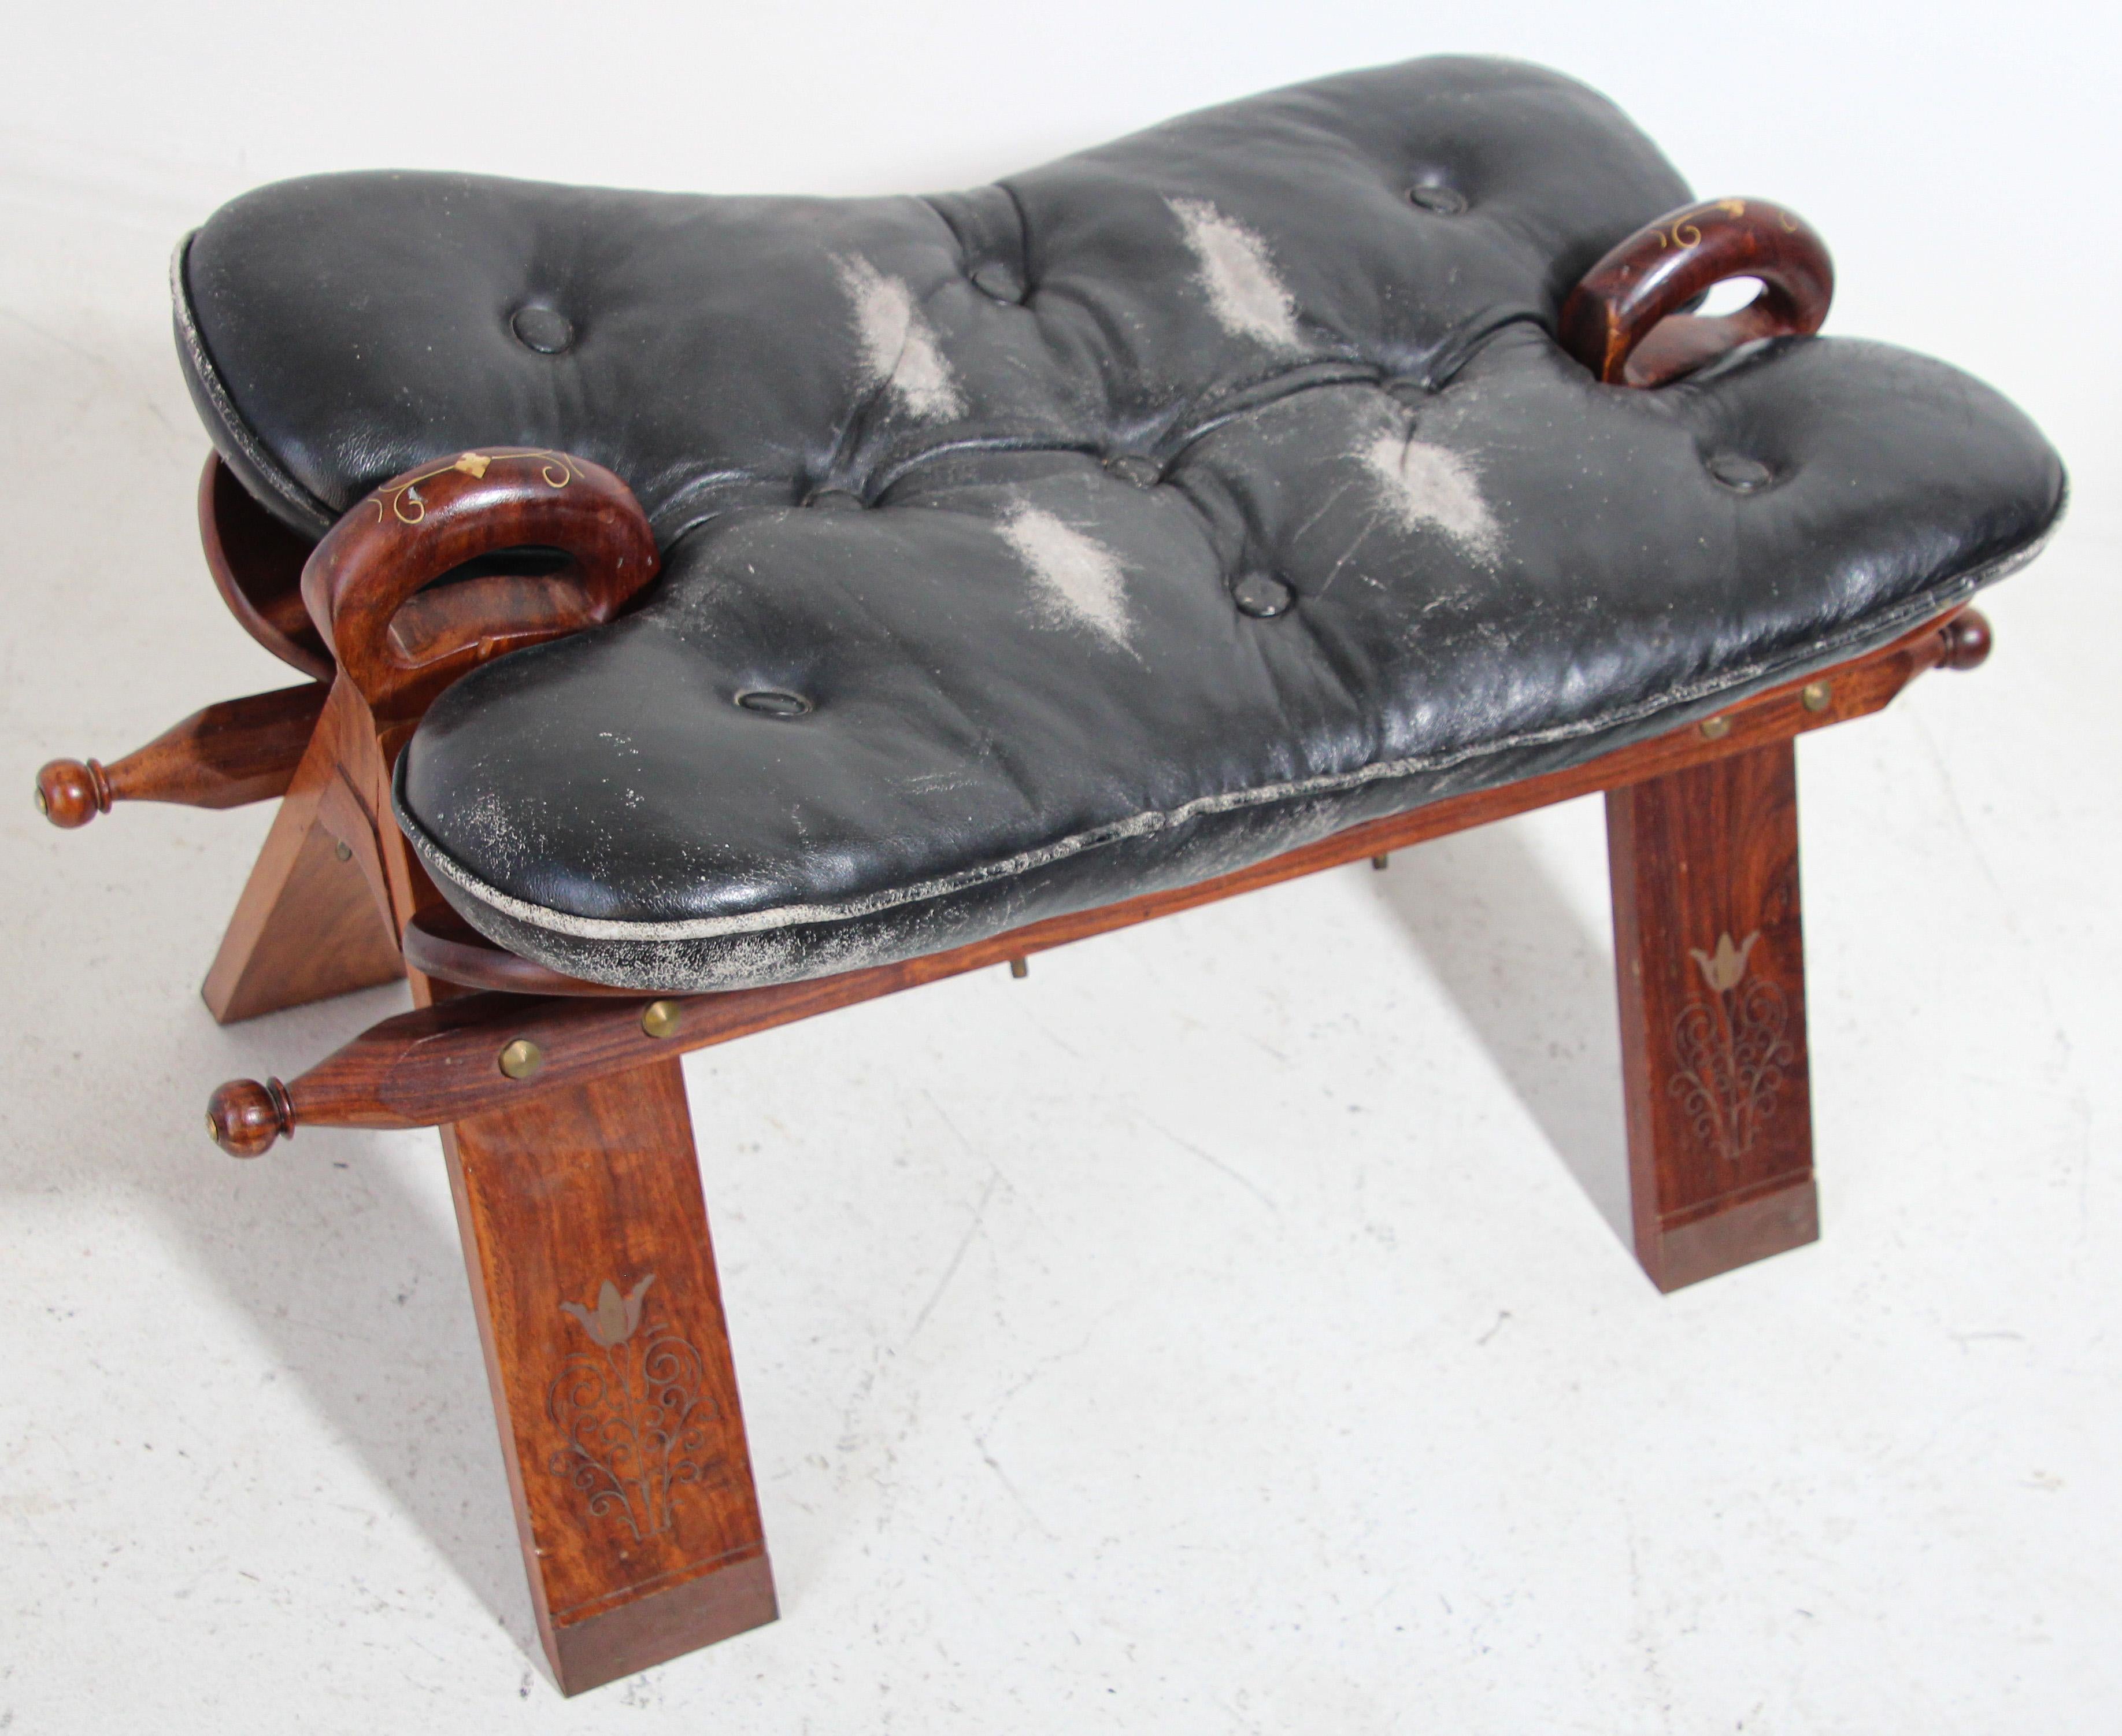 Vintage Egyptian, North Africa camel saddle shape stool.
A middle eastern wood and leather camel saddle wood bench designed with a wooden frame and a black button tufted leather cushion seat.

Traditionally used to ride camels in the desert of